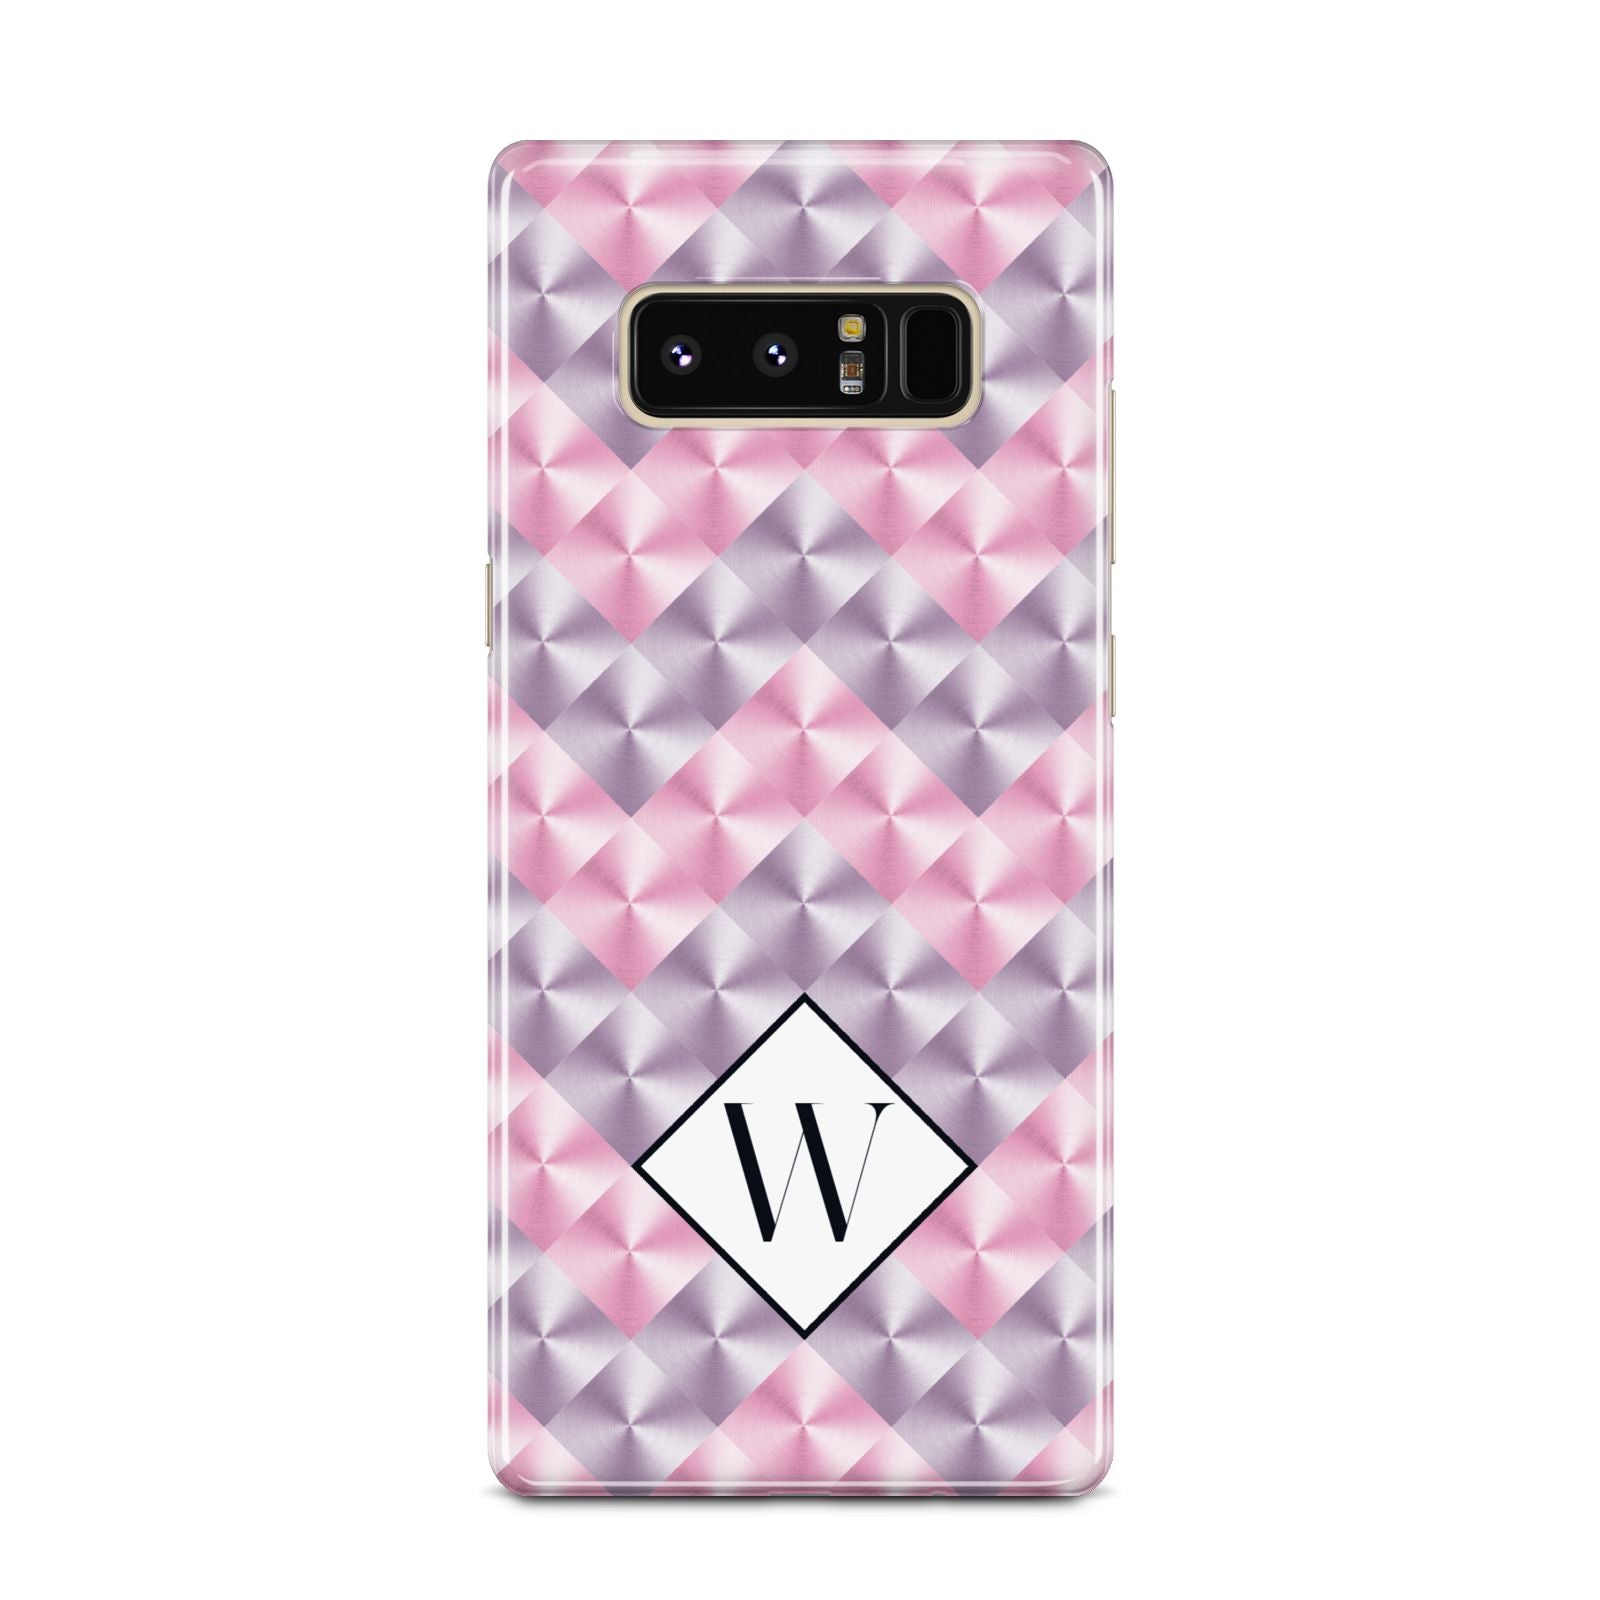 Personalised Mother Of Pearl Monogram Letter Samsung Galaxy Note 8 Case